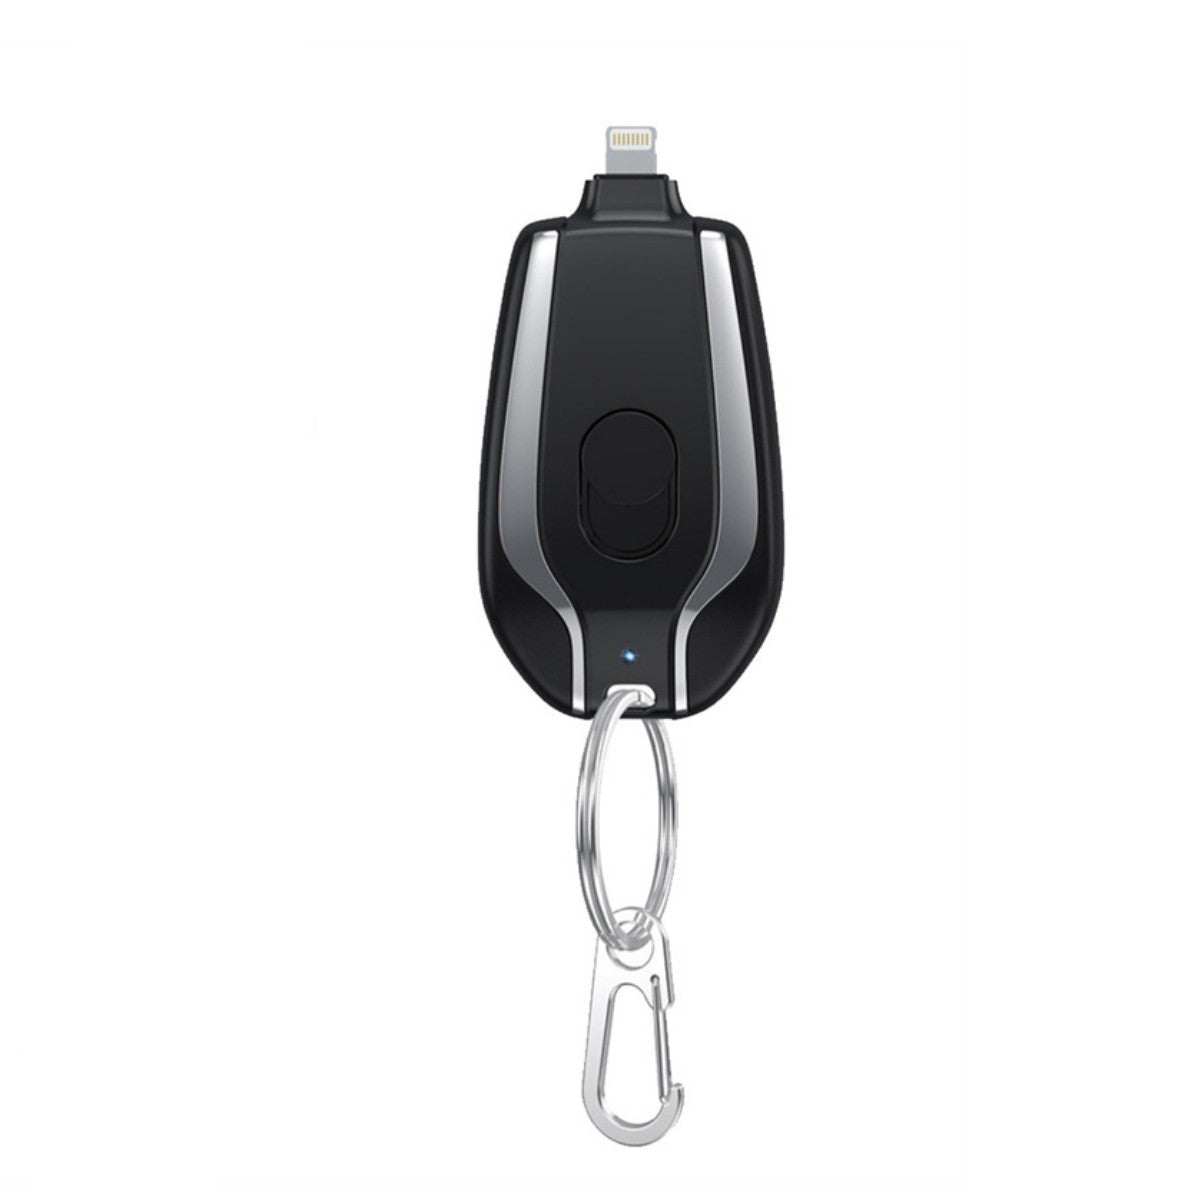 Keychain Powerbank: Compact Fast-Charge for iPhone & Android